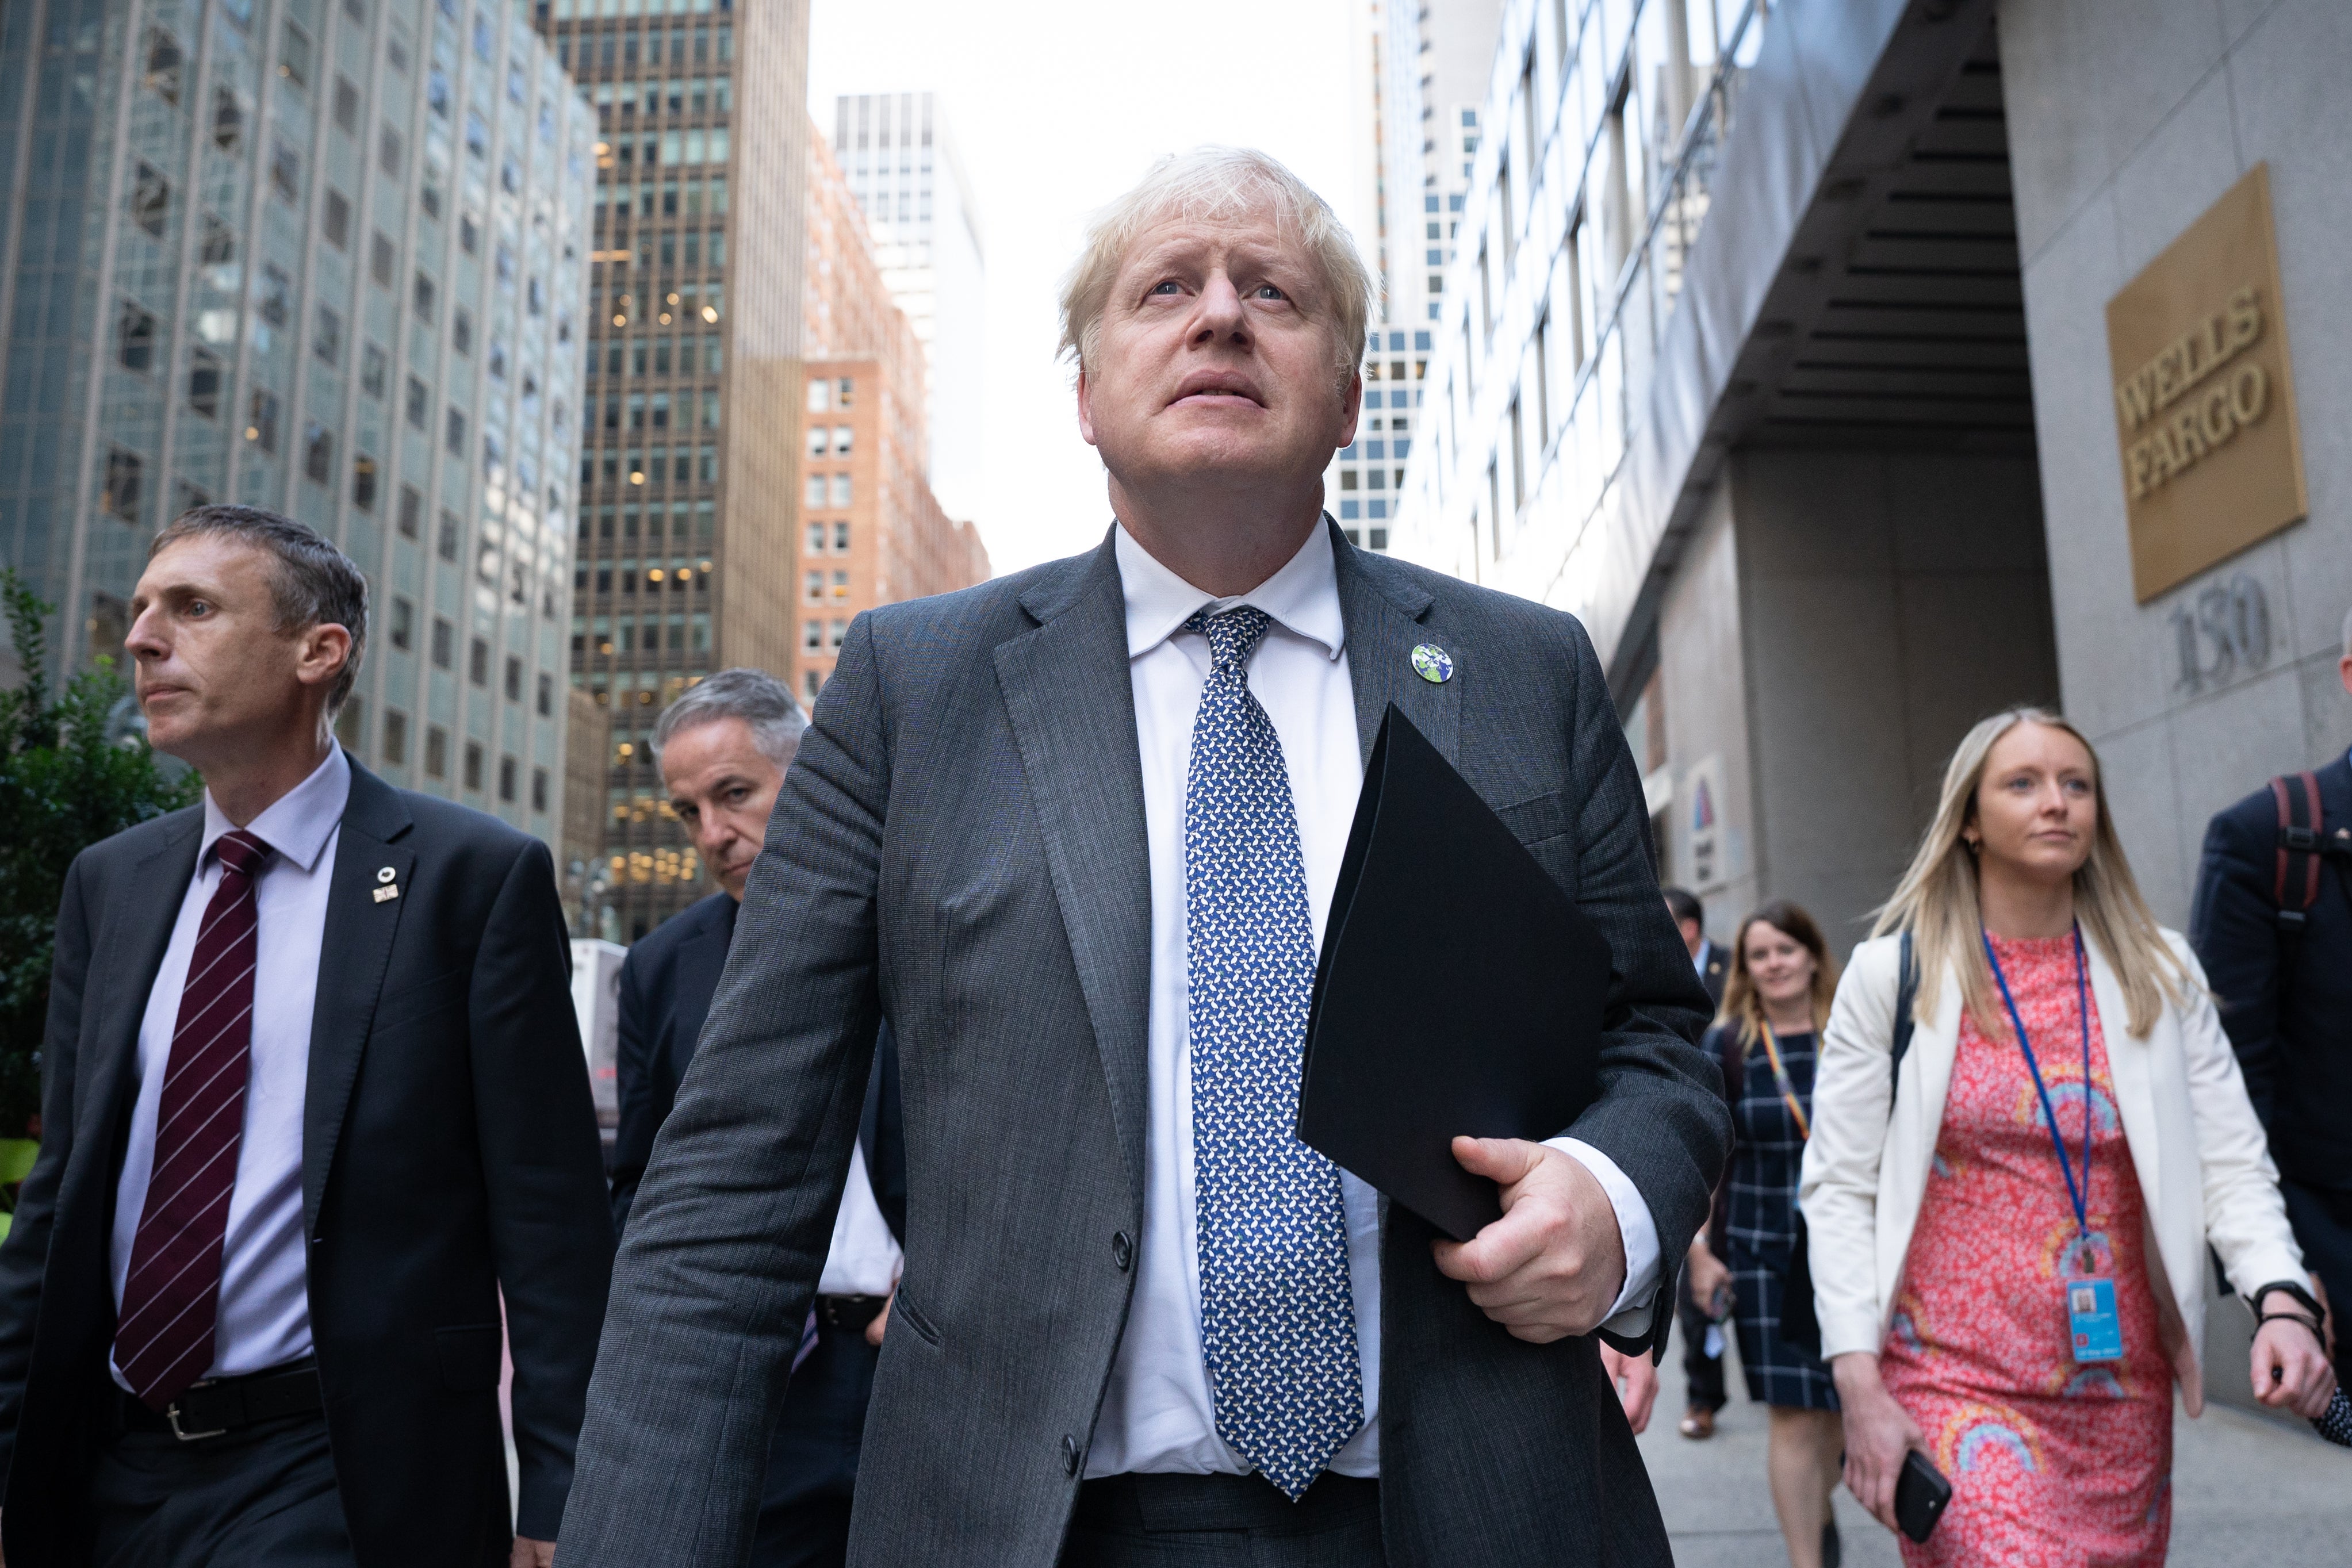 Boris Johnson walks to a television interview in New York on Tuesday